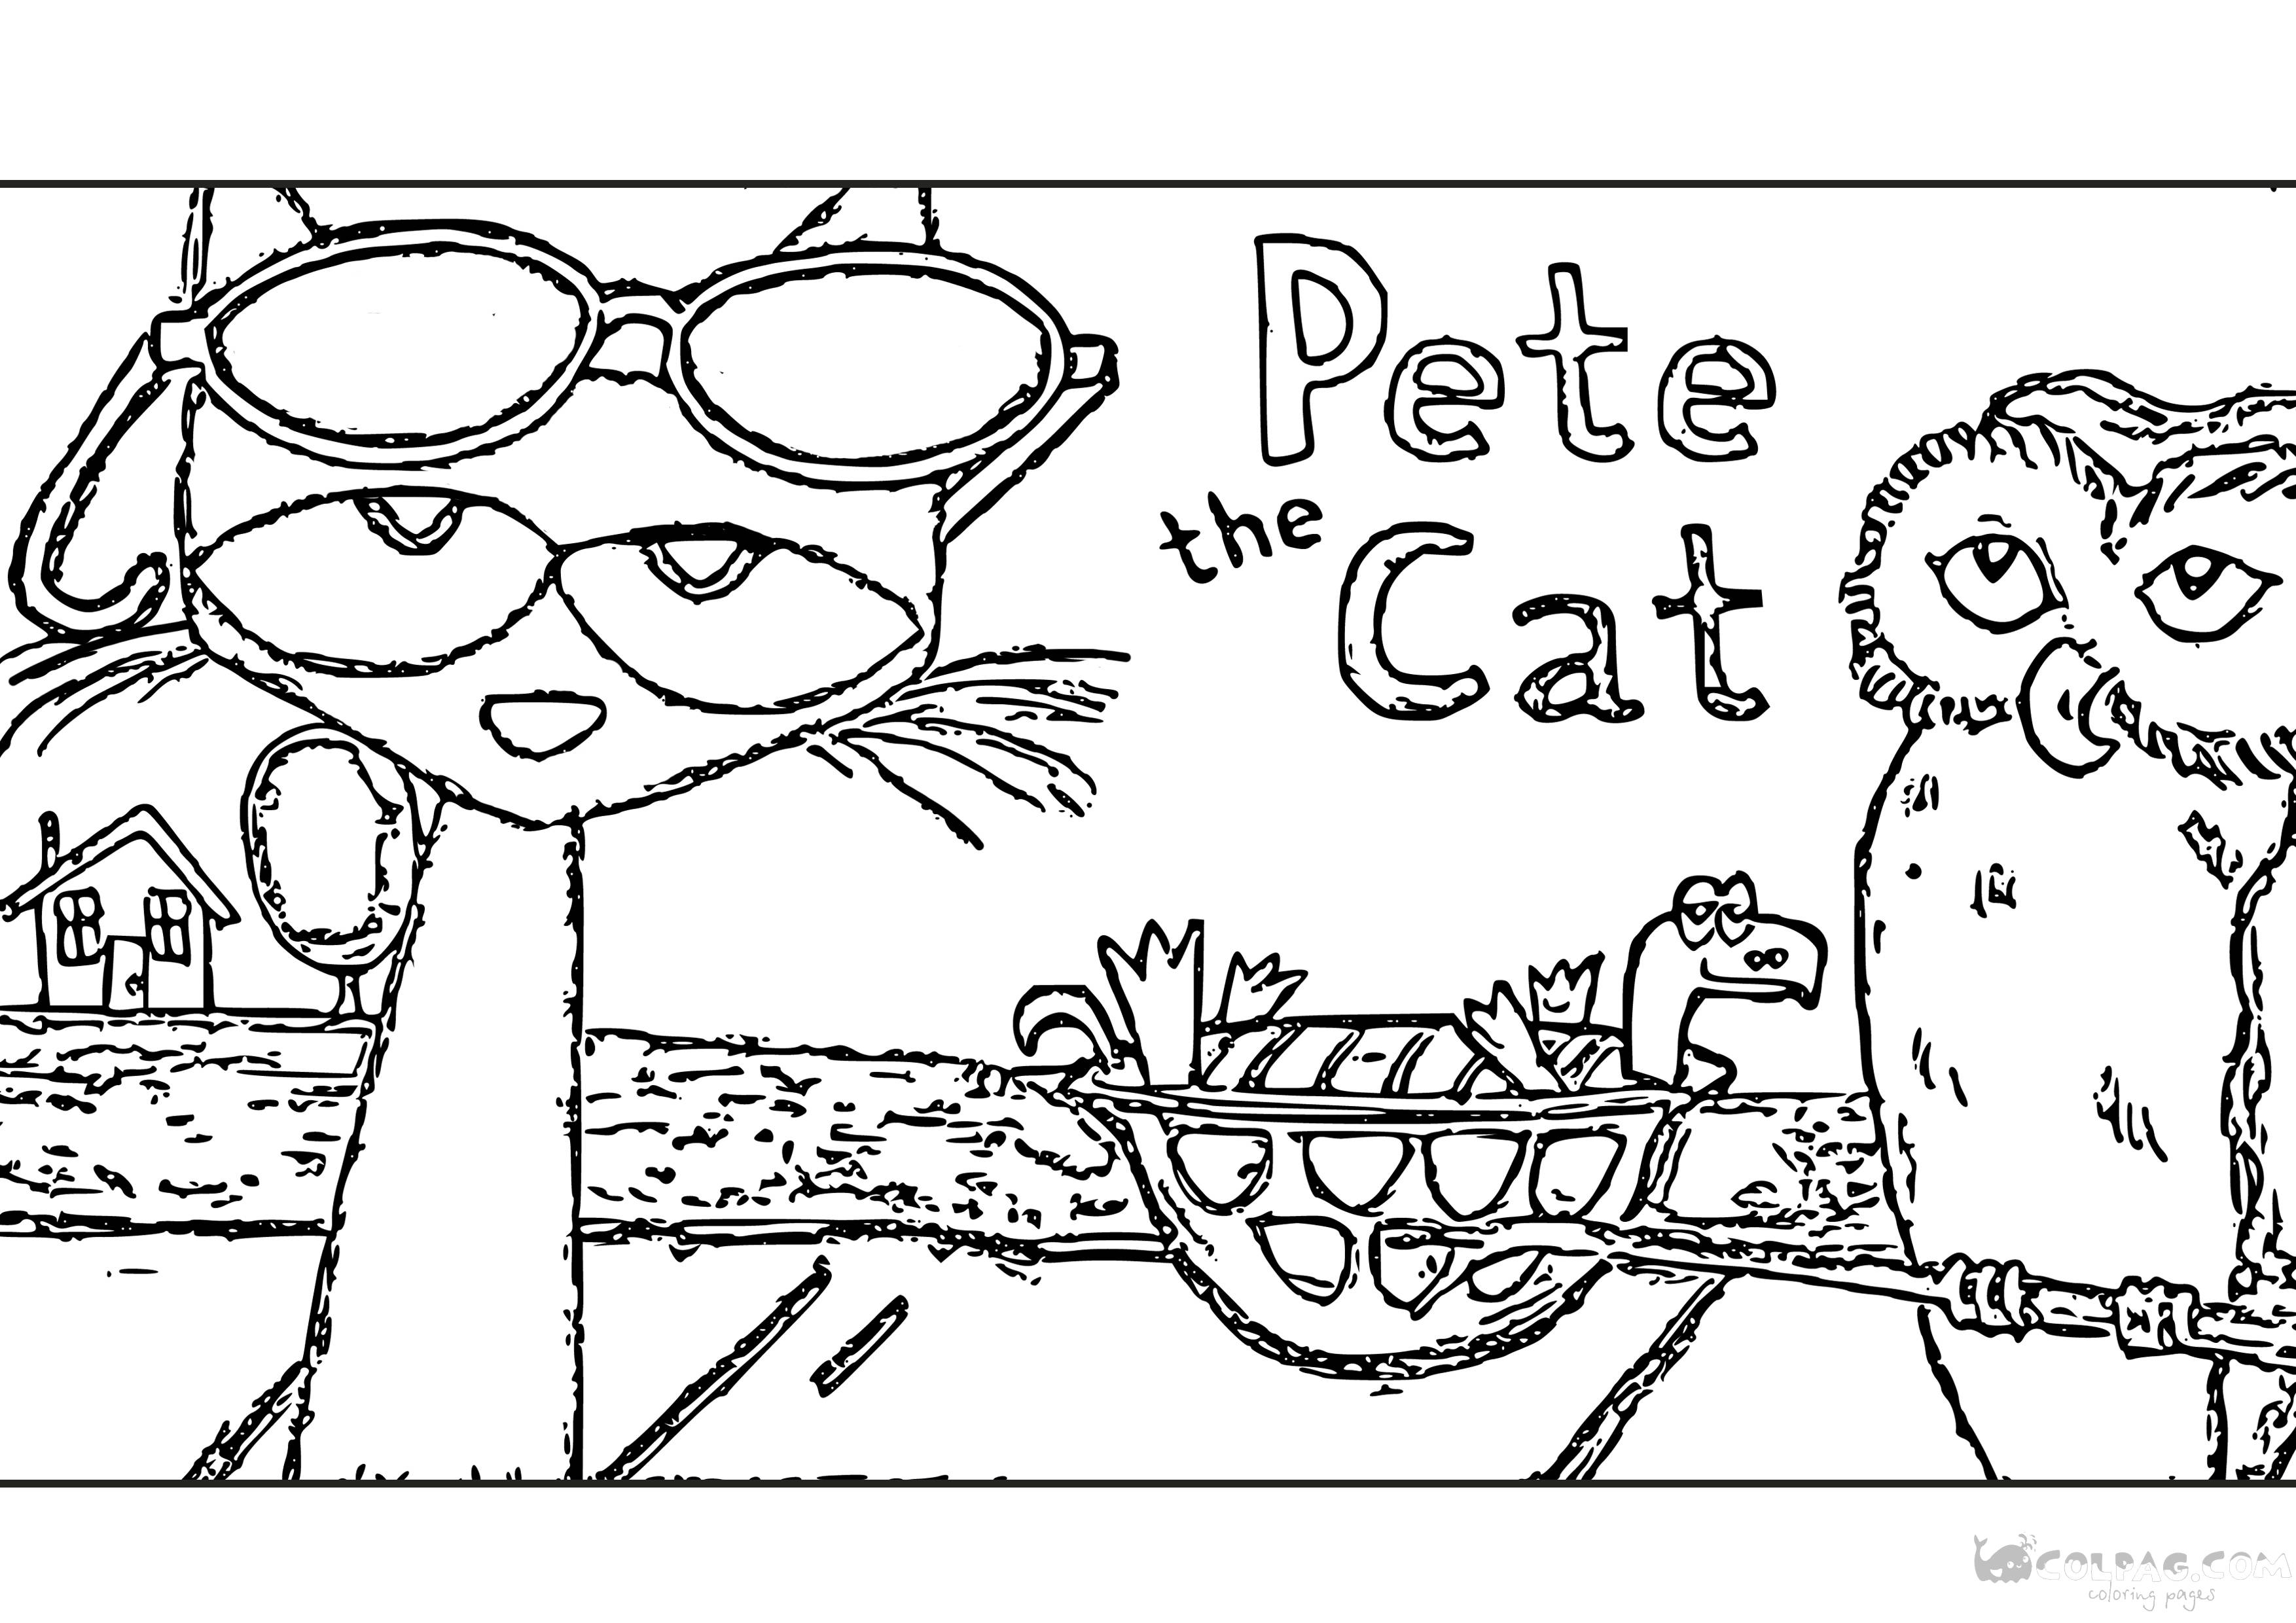 pete-the-cat-coloting-page-32-colpag